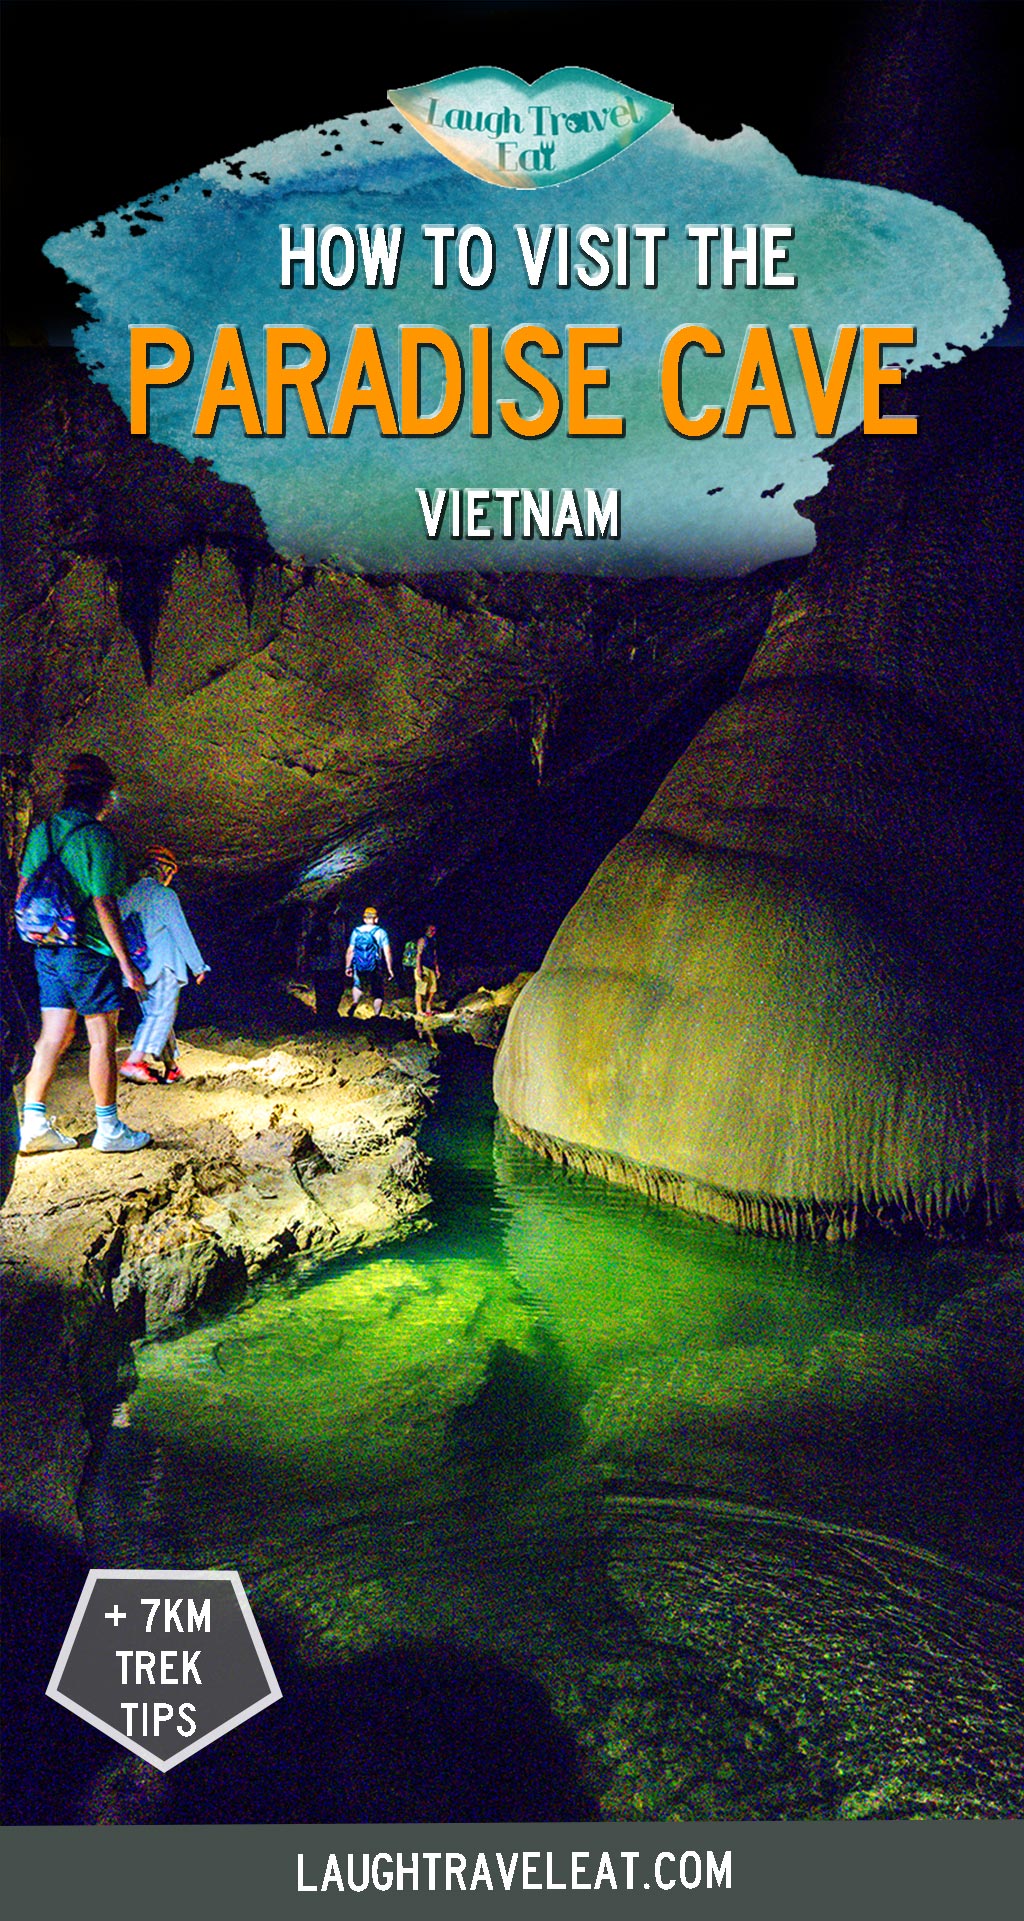 Paradise Cave is one of the most popular caves to visit in the Phong Nha, Vietnam. It is the longest dry cave in Asia with stunning stalactites and stalagmites. You can visit its 2km walkway or get adventurous on a 7km trek to the doline and experience the pristine cave beyond the initial 2km. Here's a complete guide: #PhongNha #Cave #Vietnam